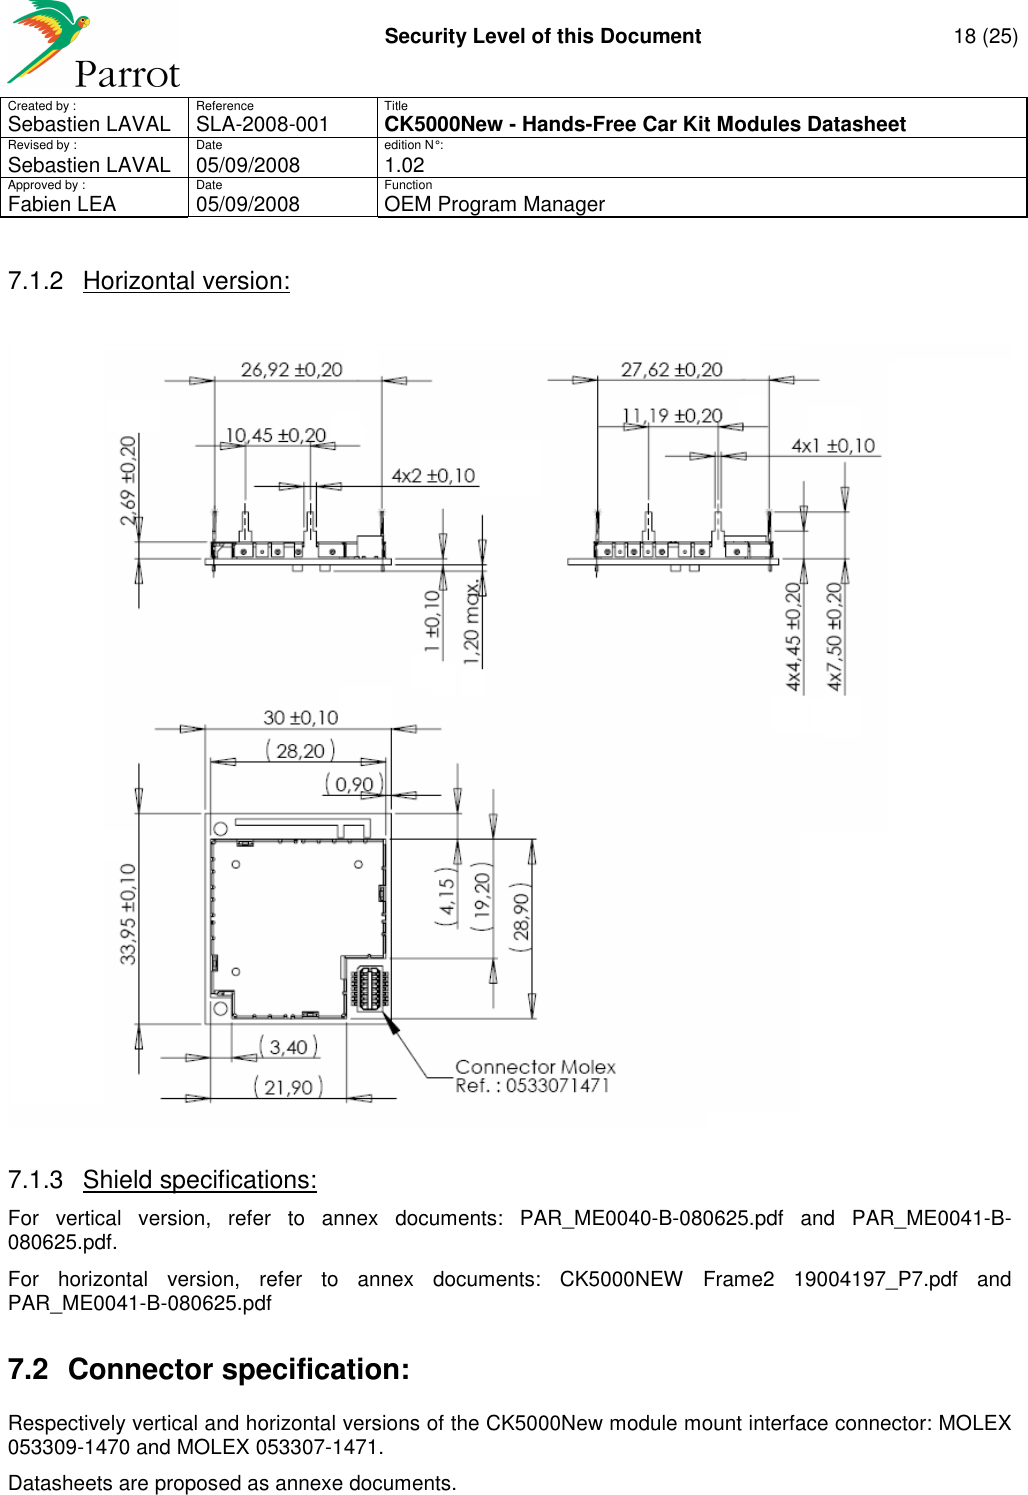     Security Level of this Document  18 (25) Created by :  Reference  Title Sebastien LAVAL   SLA-2008-001 CK5000New - Hands-Free Car Kit Modules Datasheet Revised by :  Date  edition N° : Sebastien LAVAL  05/09/2008  1.02 Approved by :  Date  Function     Fabien LEA  05/09/2008  OEM Program Manager   7.1.2  Horizontal version:   7.1.3  Shield specifications: For  vertical  version,  refer  to  annex  documents:  PAR_ME0040-B-080625.pdf  and  PAR_ME0041-B-080625.pdf. For  horizontal  version,  refer  to  annex  documents:  CK5000NEW  Frame2  19004197_P7.pdf  and PAR_ME0041-B-080625.pdf 7.2  Connector specification: Respectively vertical and horizontal versions of the CK5000New module mount interface connector: MOLEX 053309-1470 and MOLEX 053307-1471. Datasheets are proposed as annexe documents.  